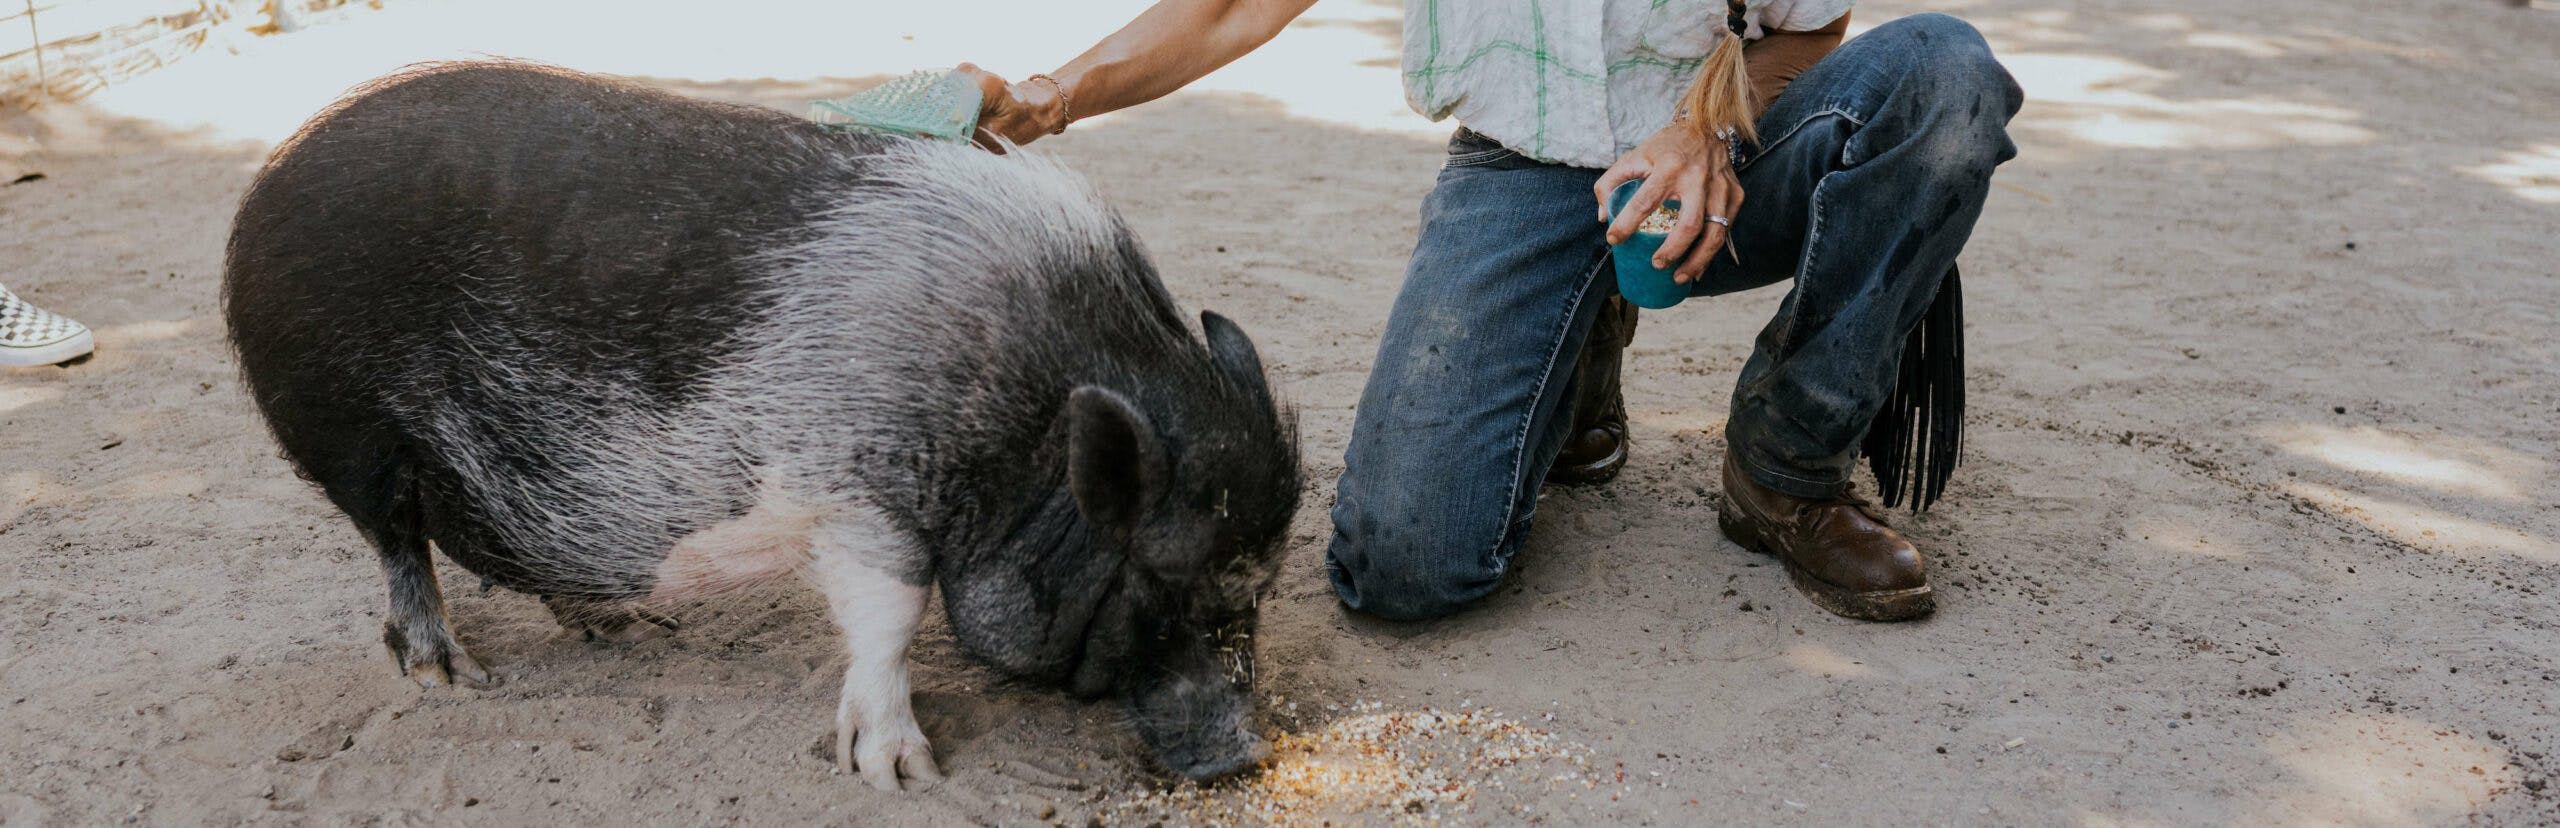 person brushing a hog